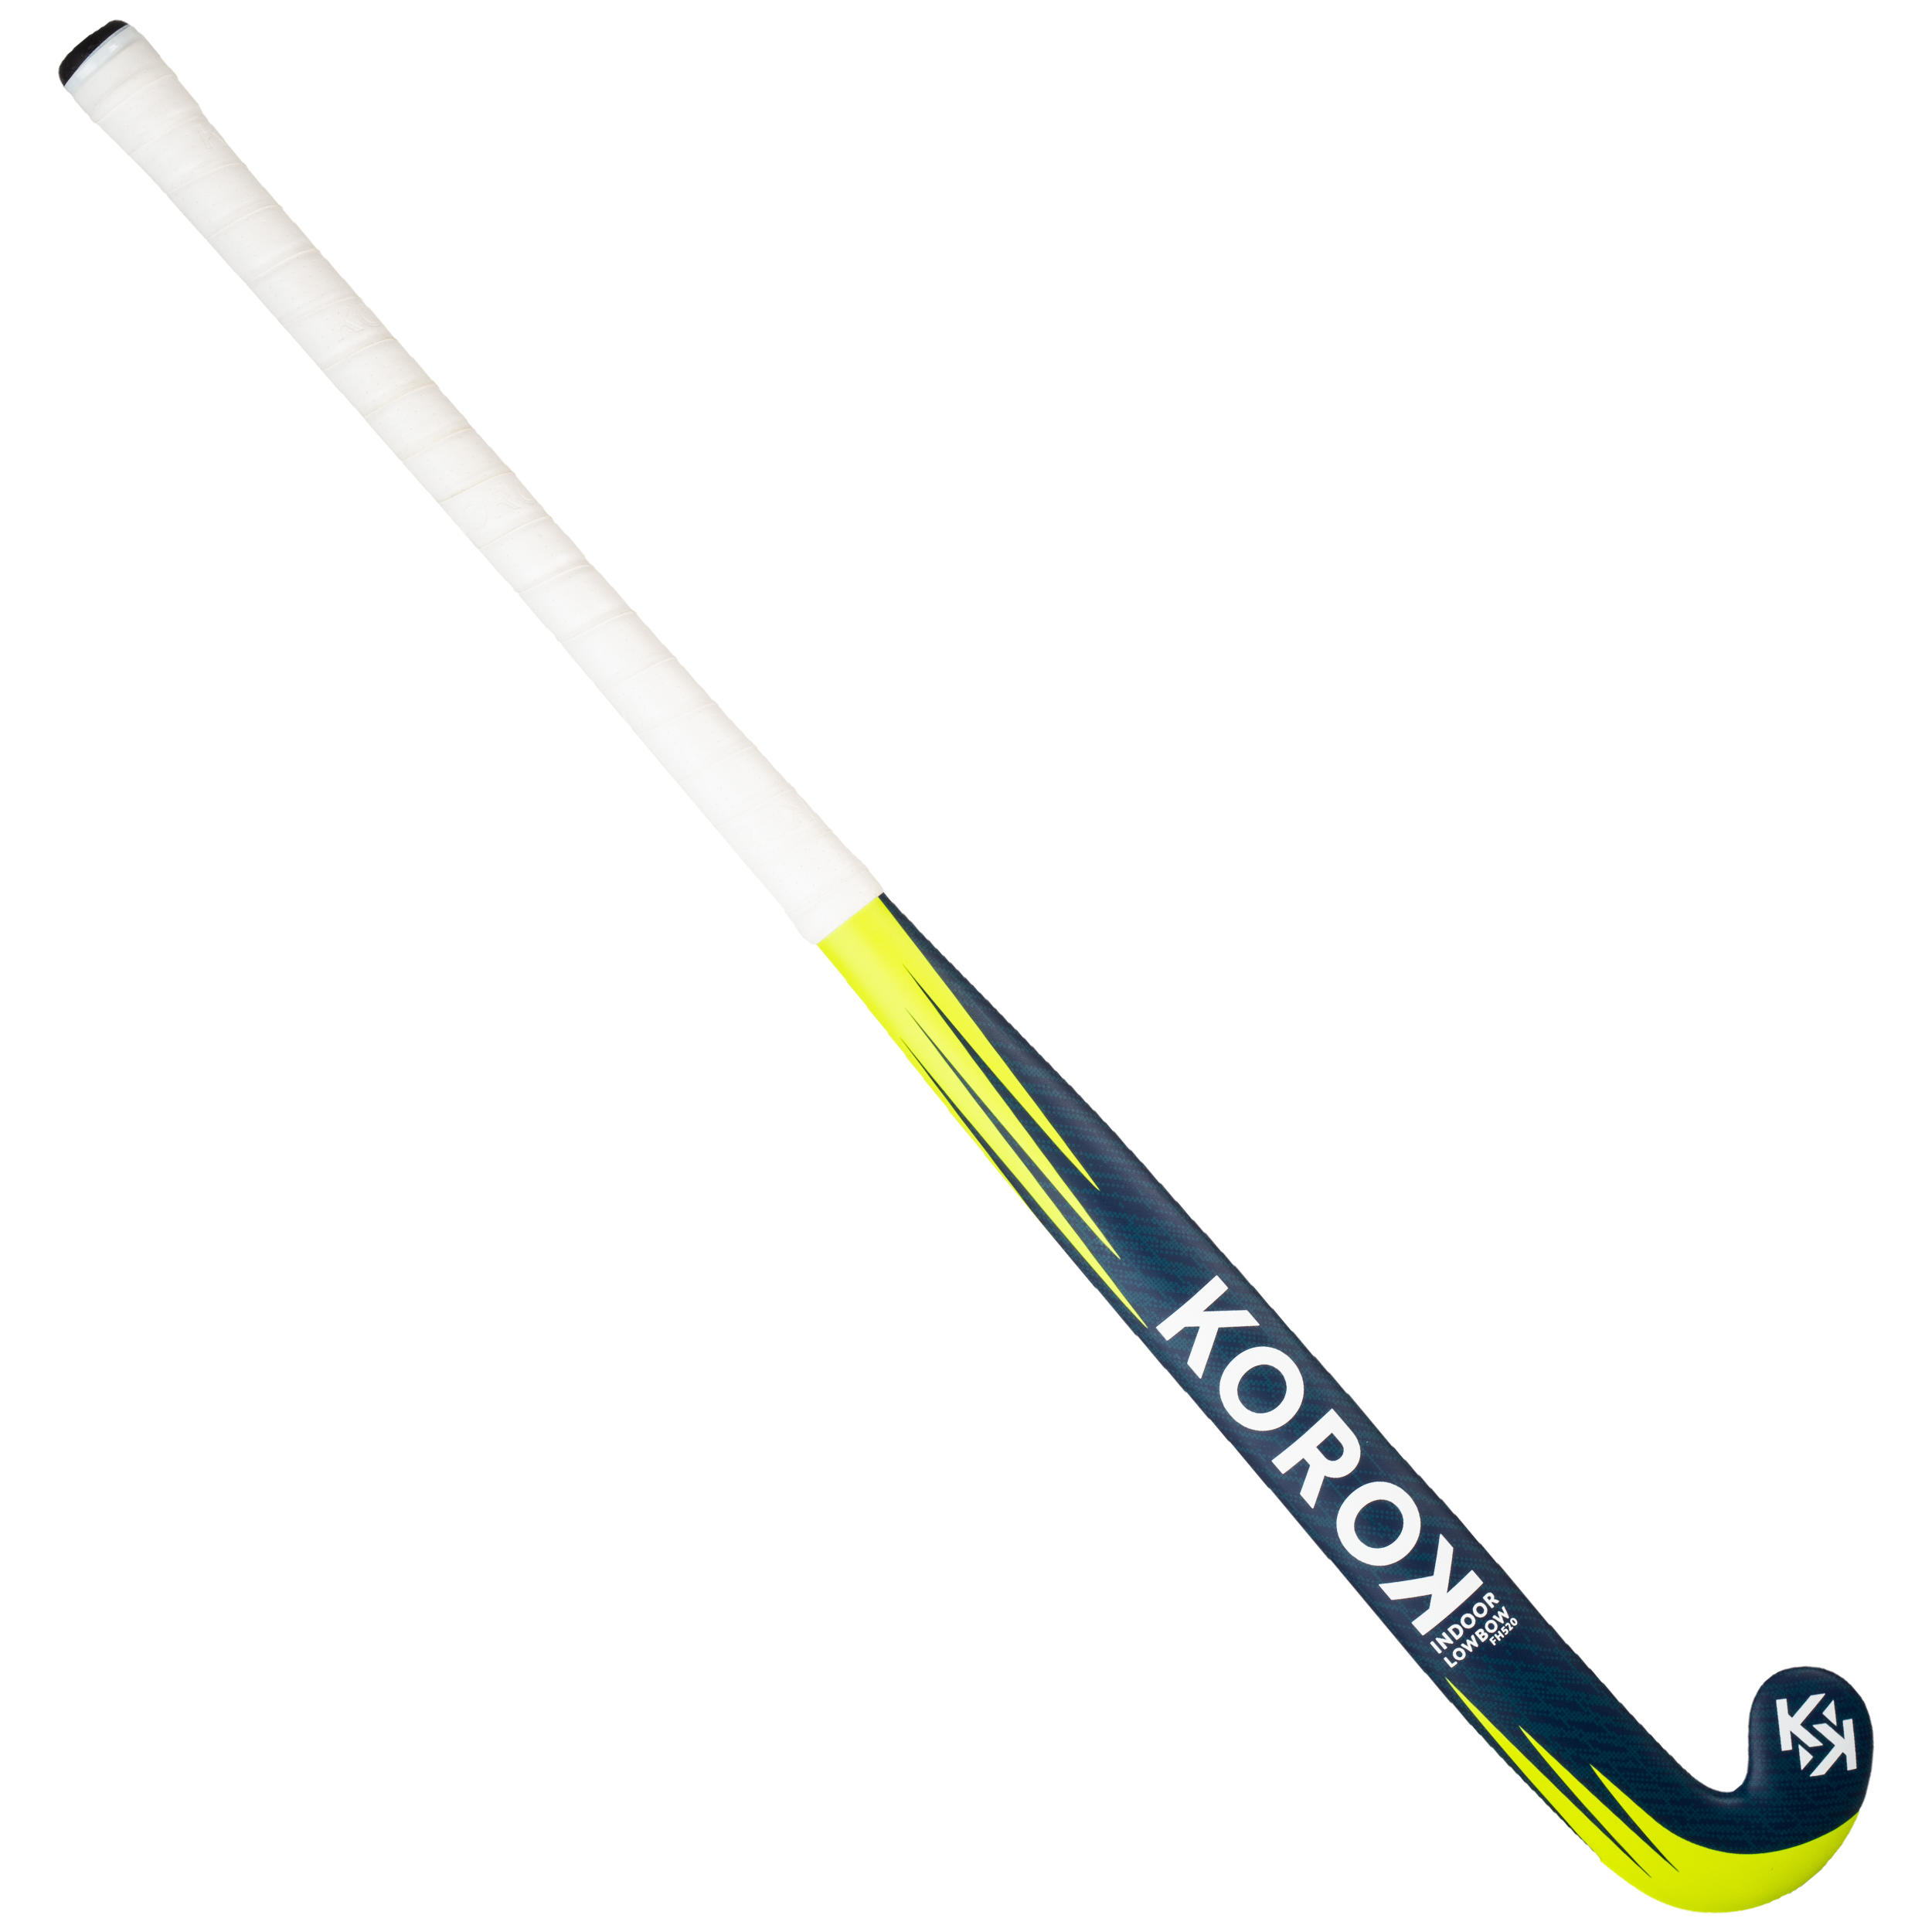 Adult Intermediate 20% Carbon Low Bow Indoor Hockey Stick FH520 - Blue/Yellow 2/10